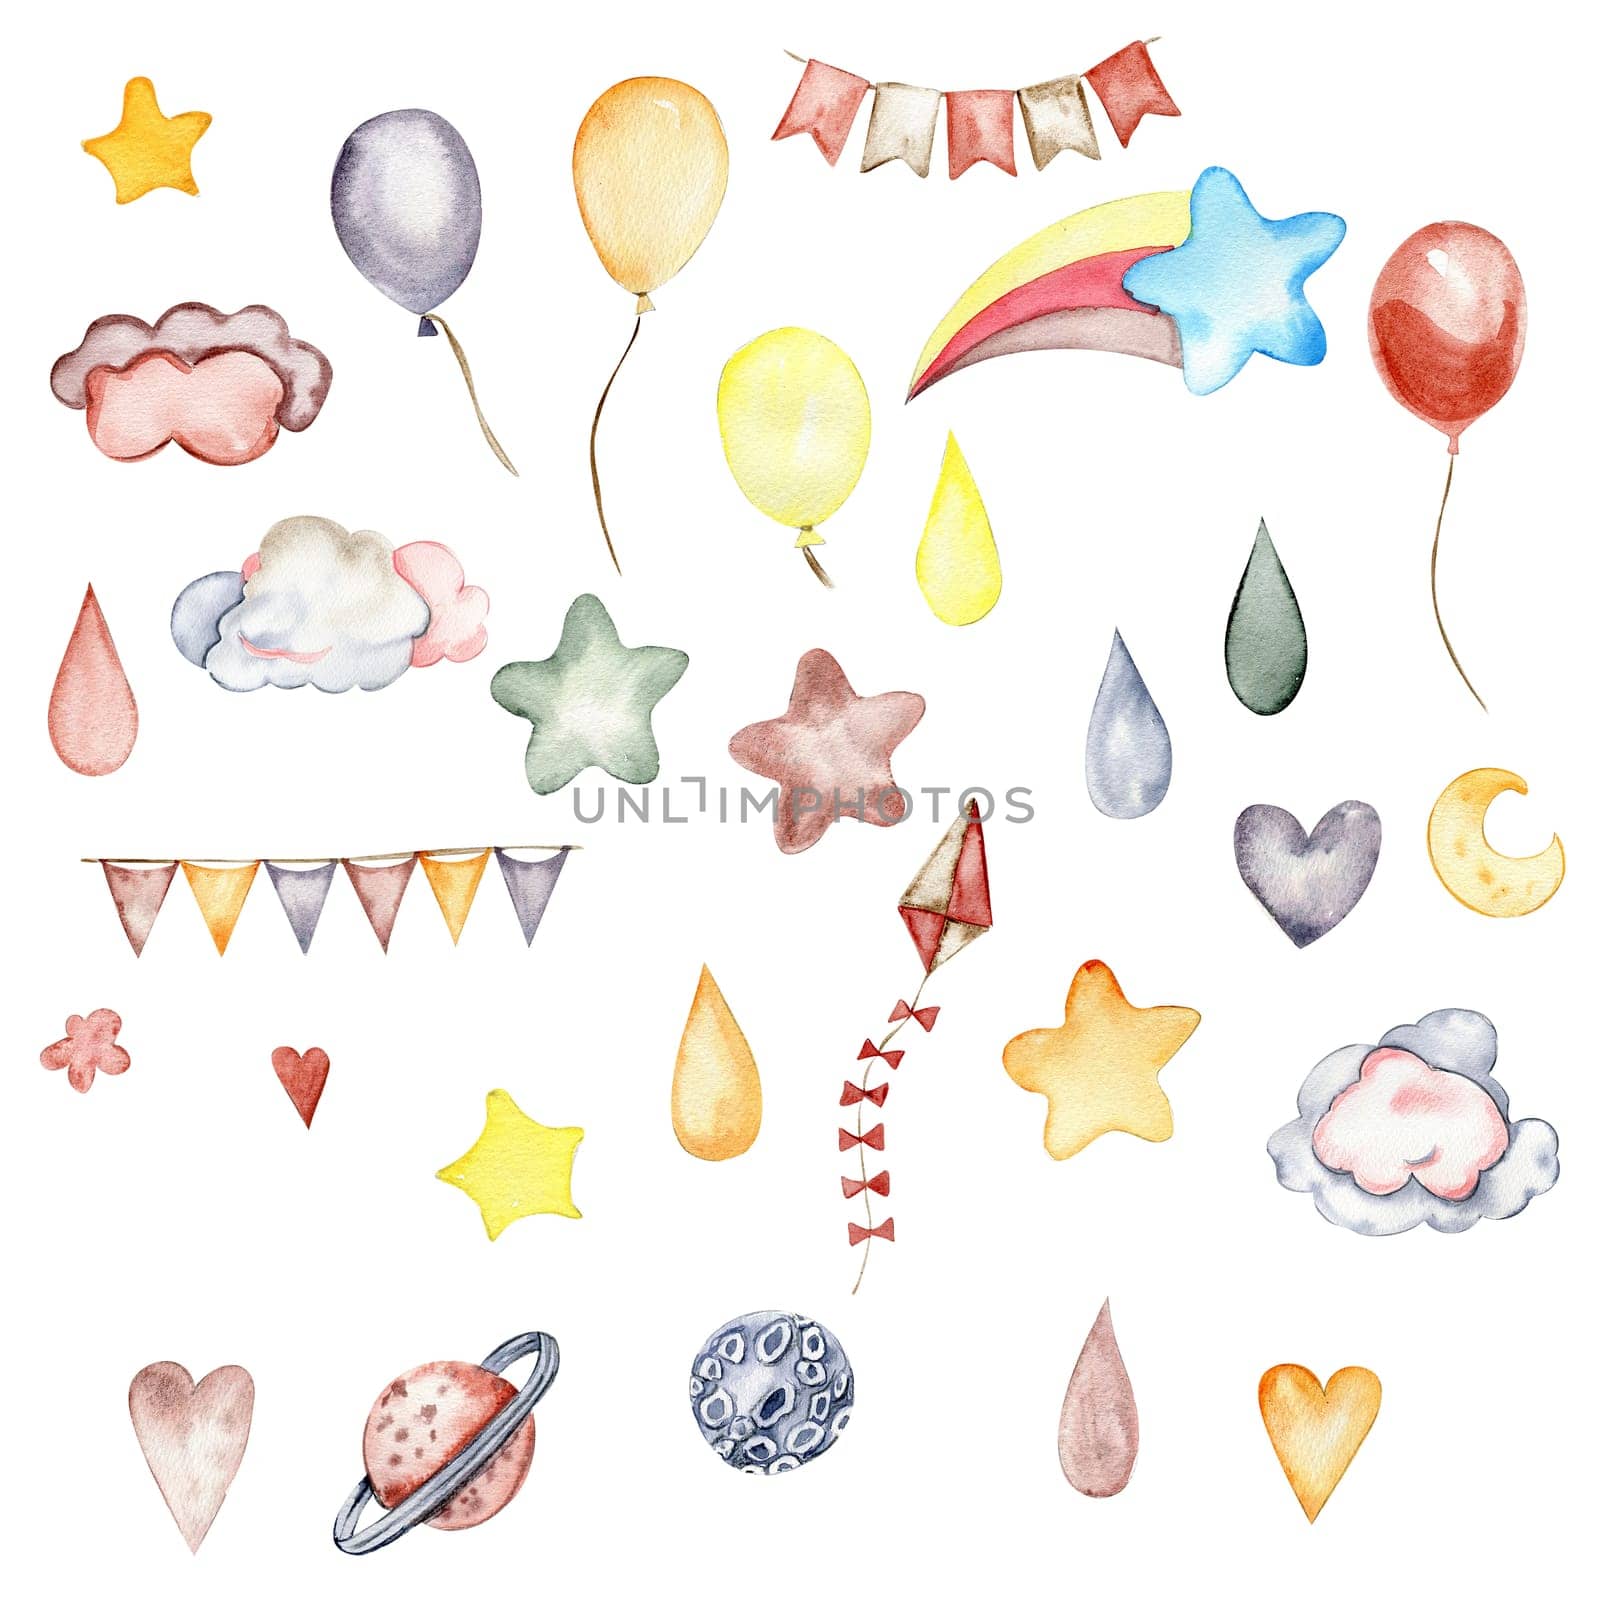 Watercolor hand painted cute party celebration elements. Illustration isolated on white background. Design for baby shower party, birthday, cake, holiday design, greetings card, invitation.